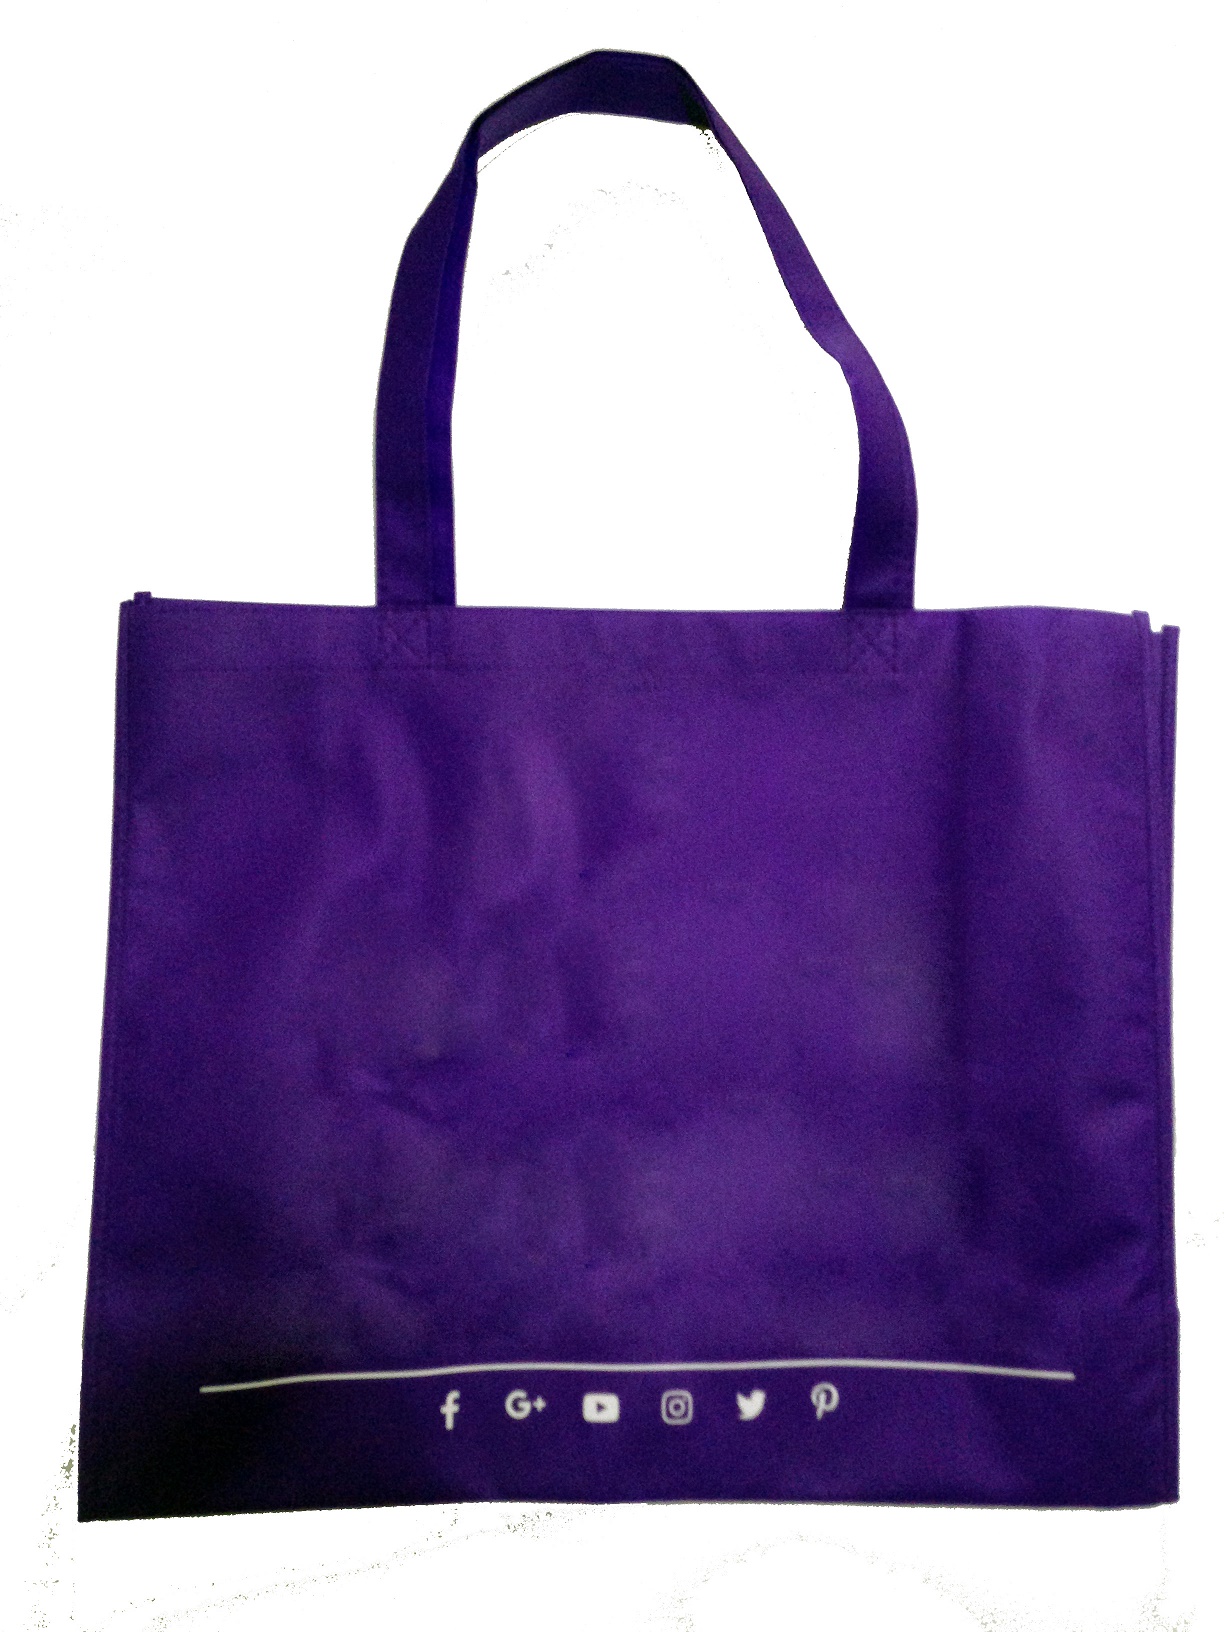 Promotional Bags Custom Printed with Your Logo | reusableabags.com